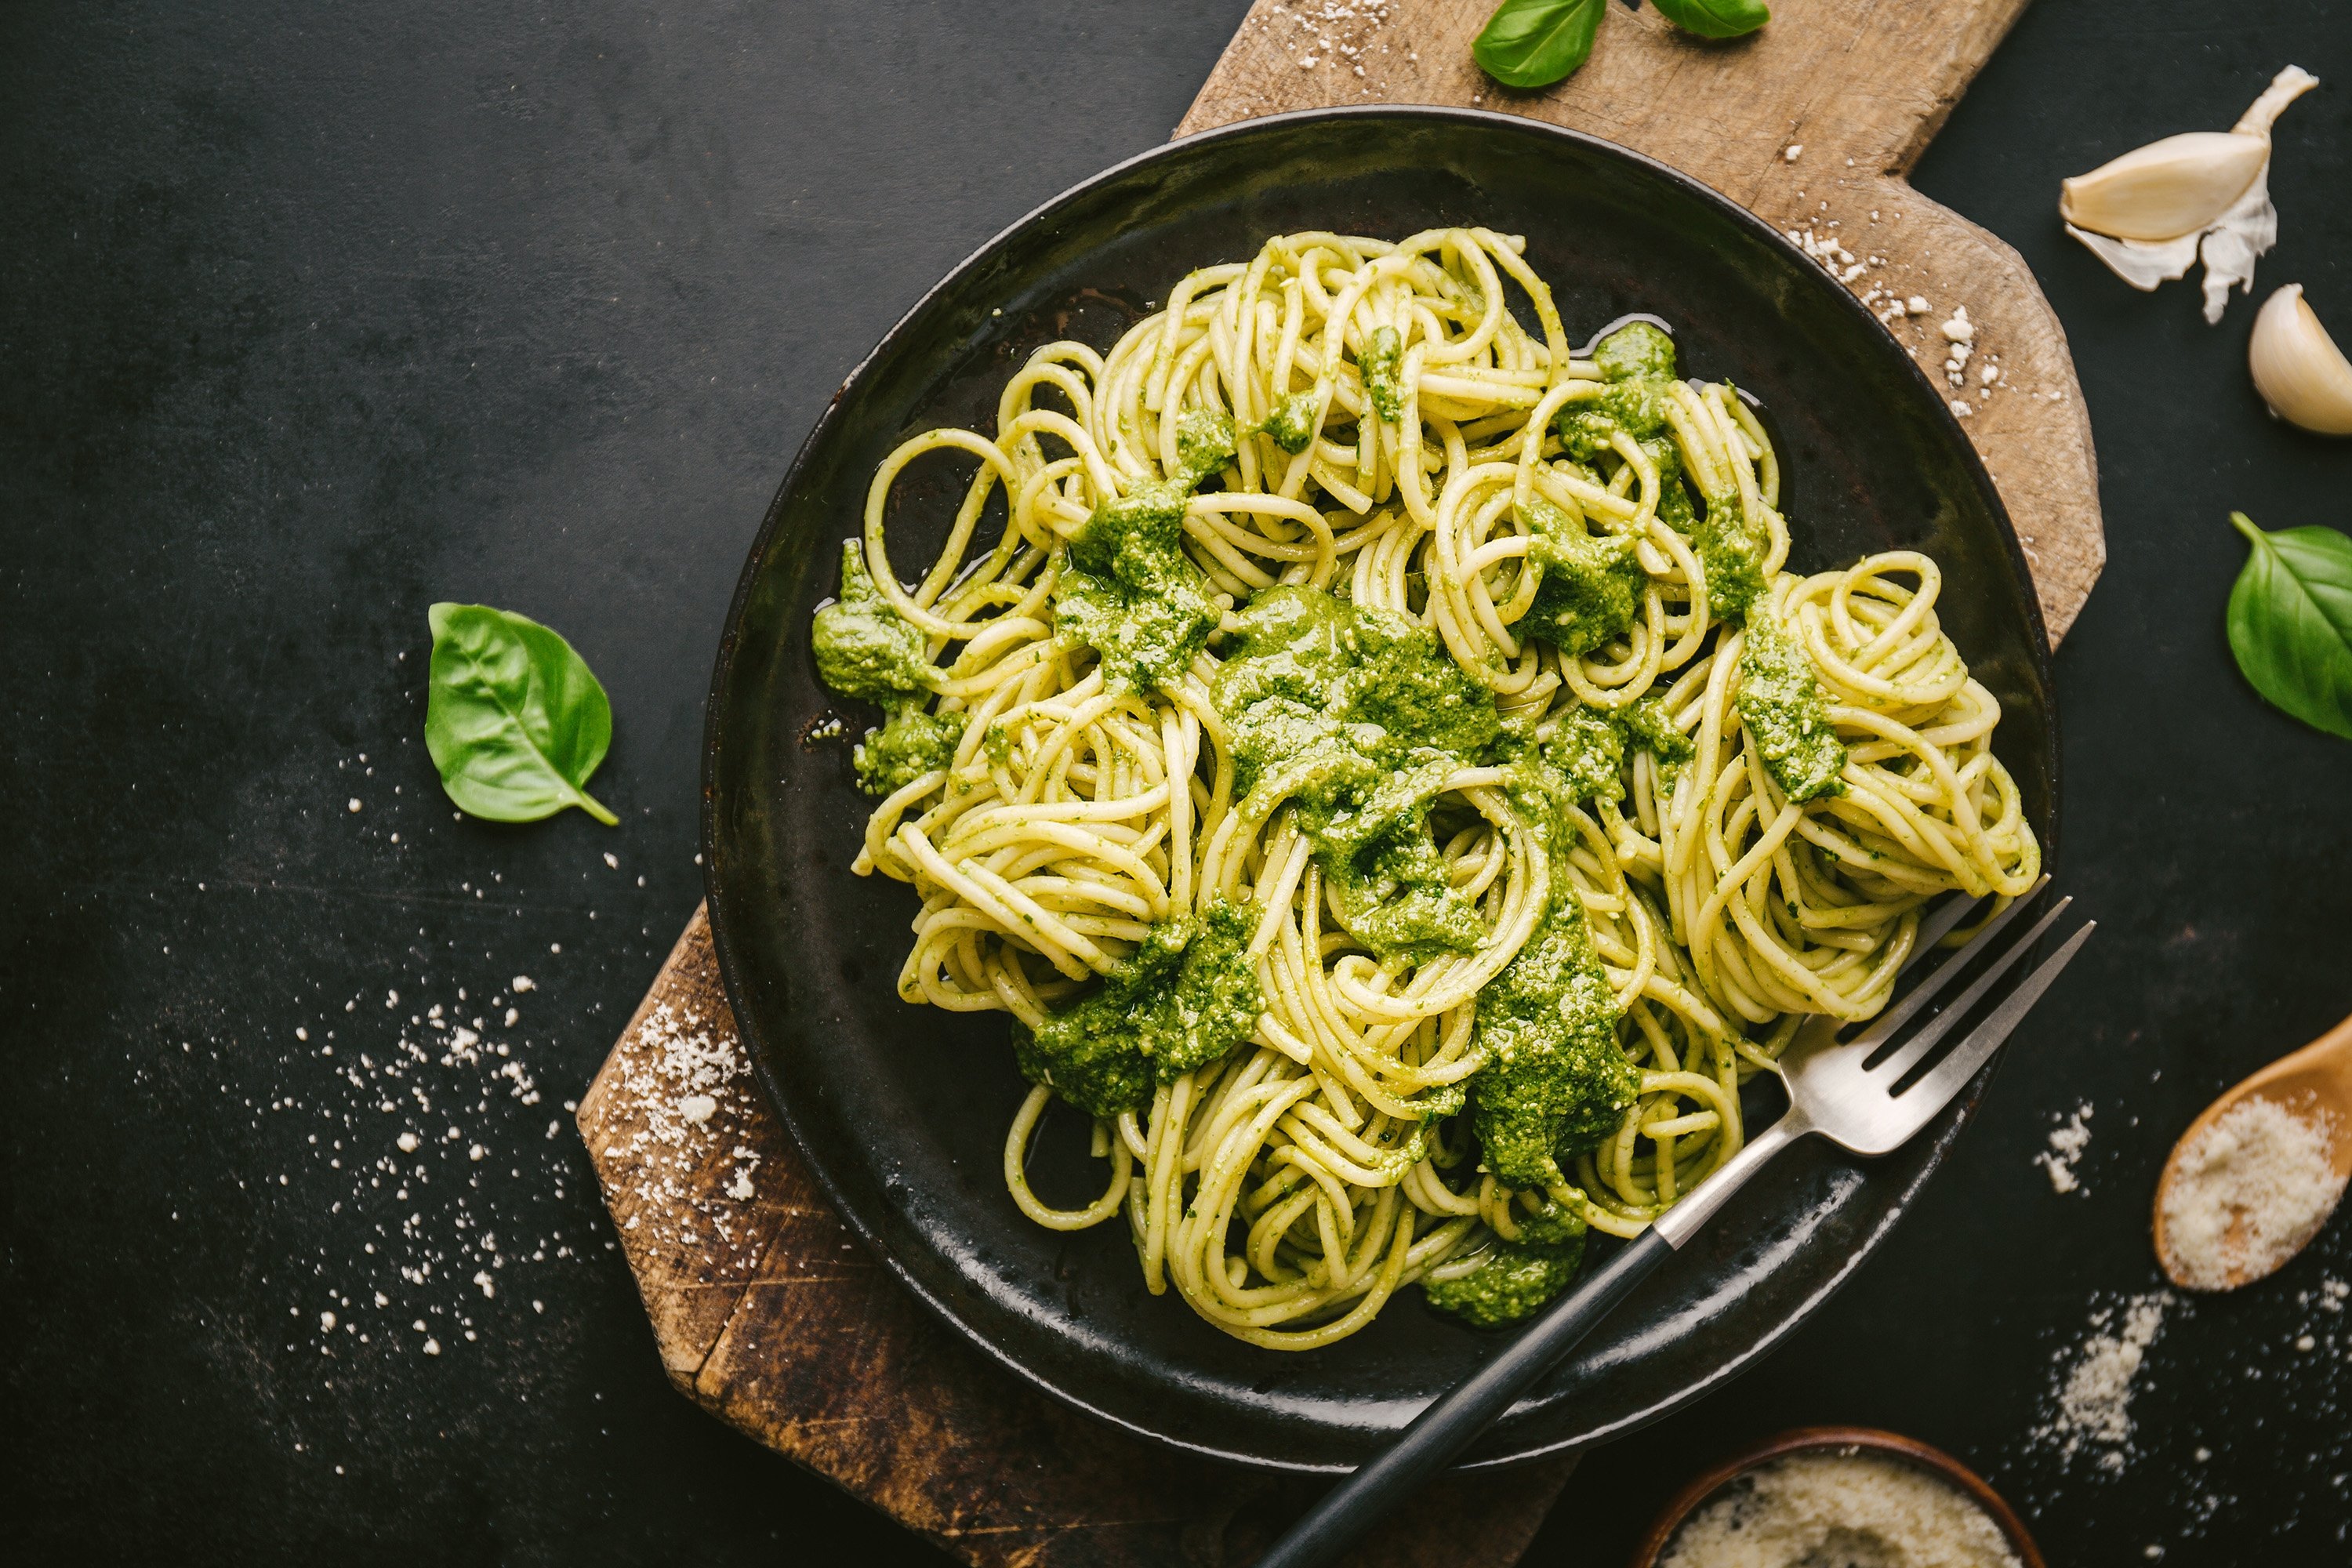 You can always add a handful of parsley to your pesto for extra flavor. (Shutterstock Photo)